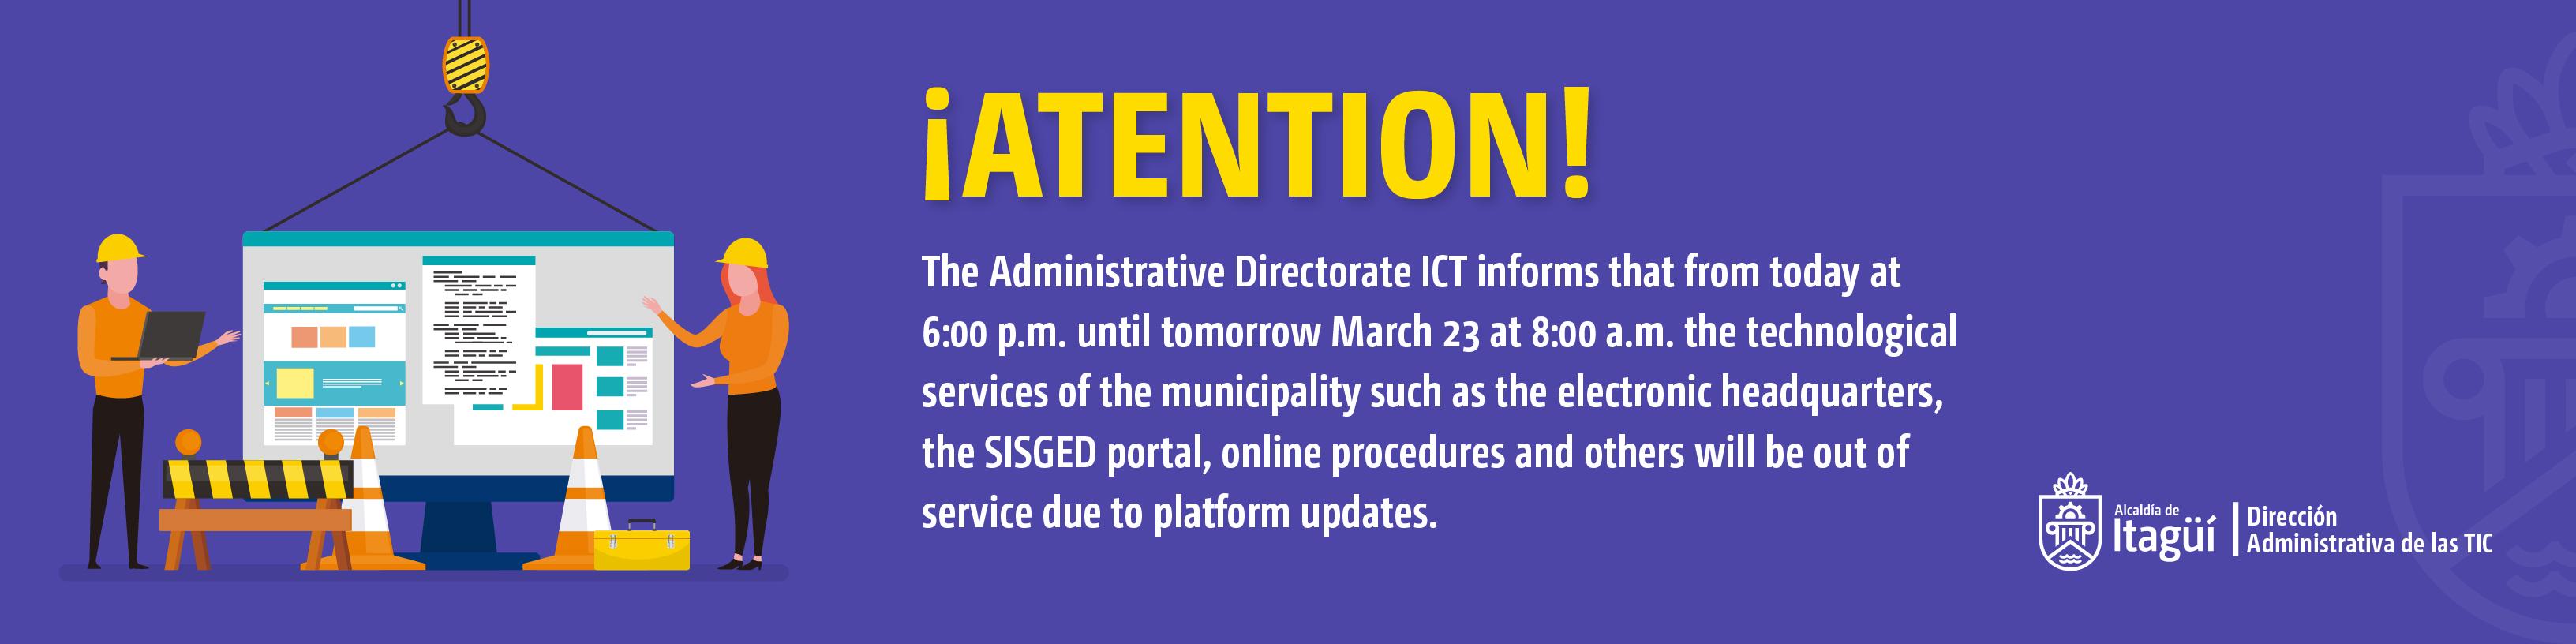 The administrative direction of ICT informs that from 600 p.m. today Wednesday 22 until tomorrow March 23 at 8:00 a.m., the technological services of the municipality such as the electronic headquarters, the SISGED portal, online procedures and others